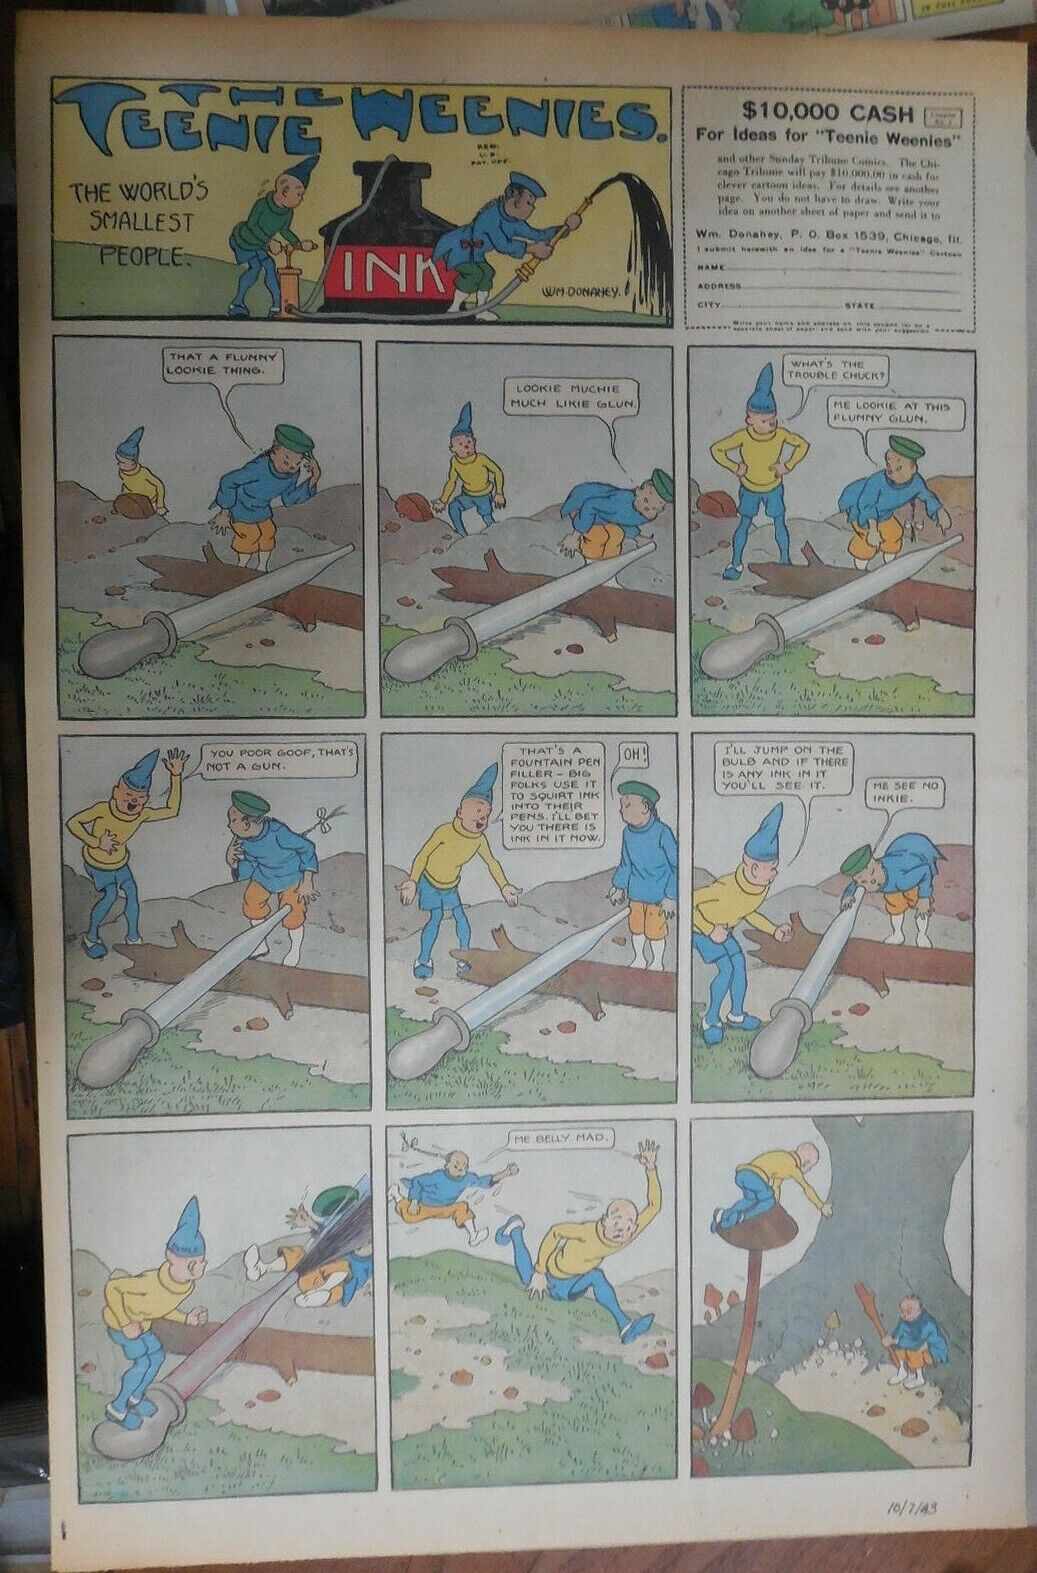 The Teenie Weenies Sunday by Wm. Donahey from 10/7/1923 Full Page Size